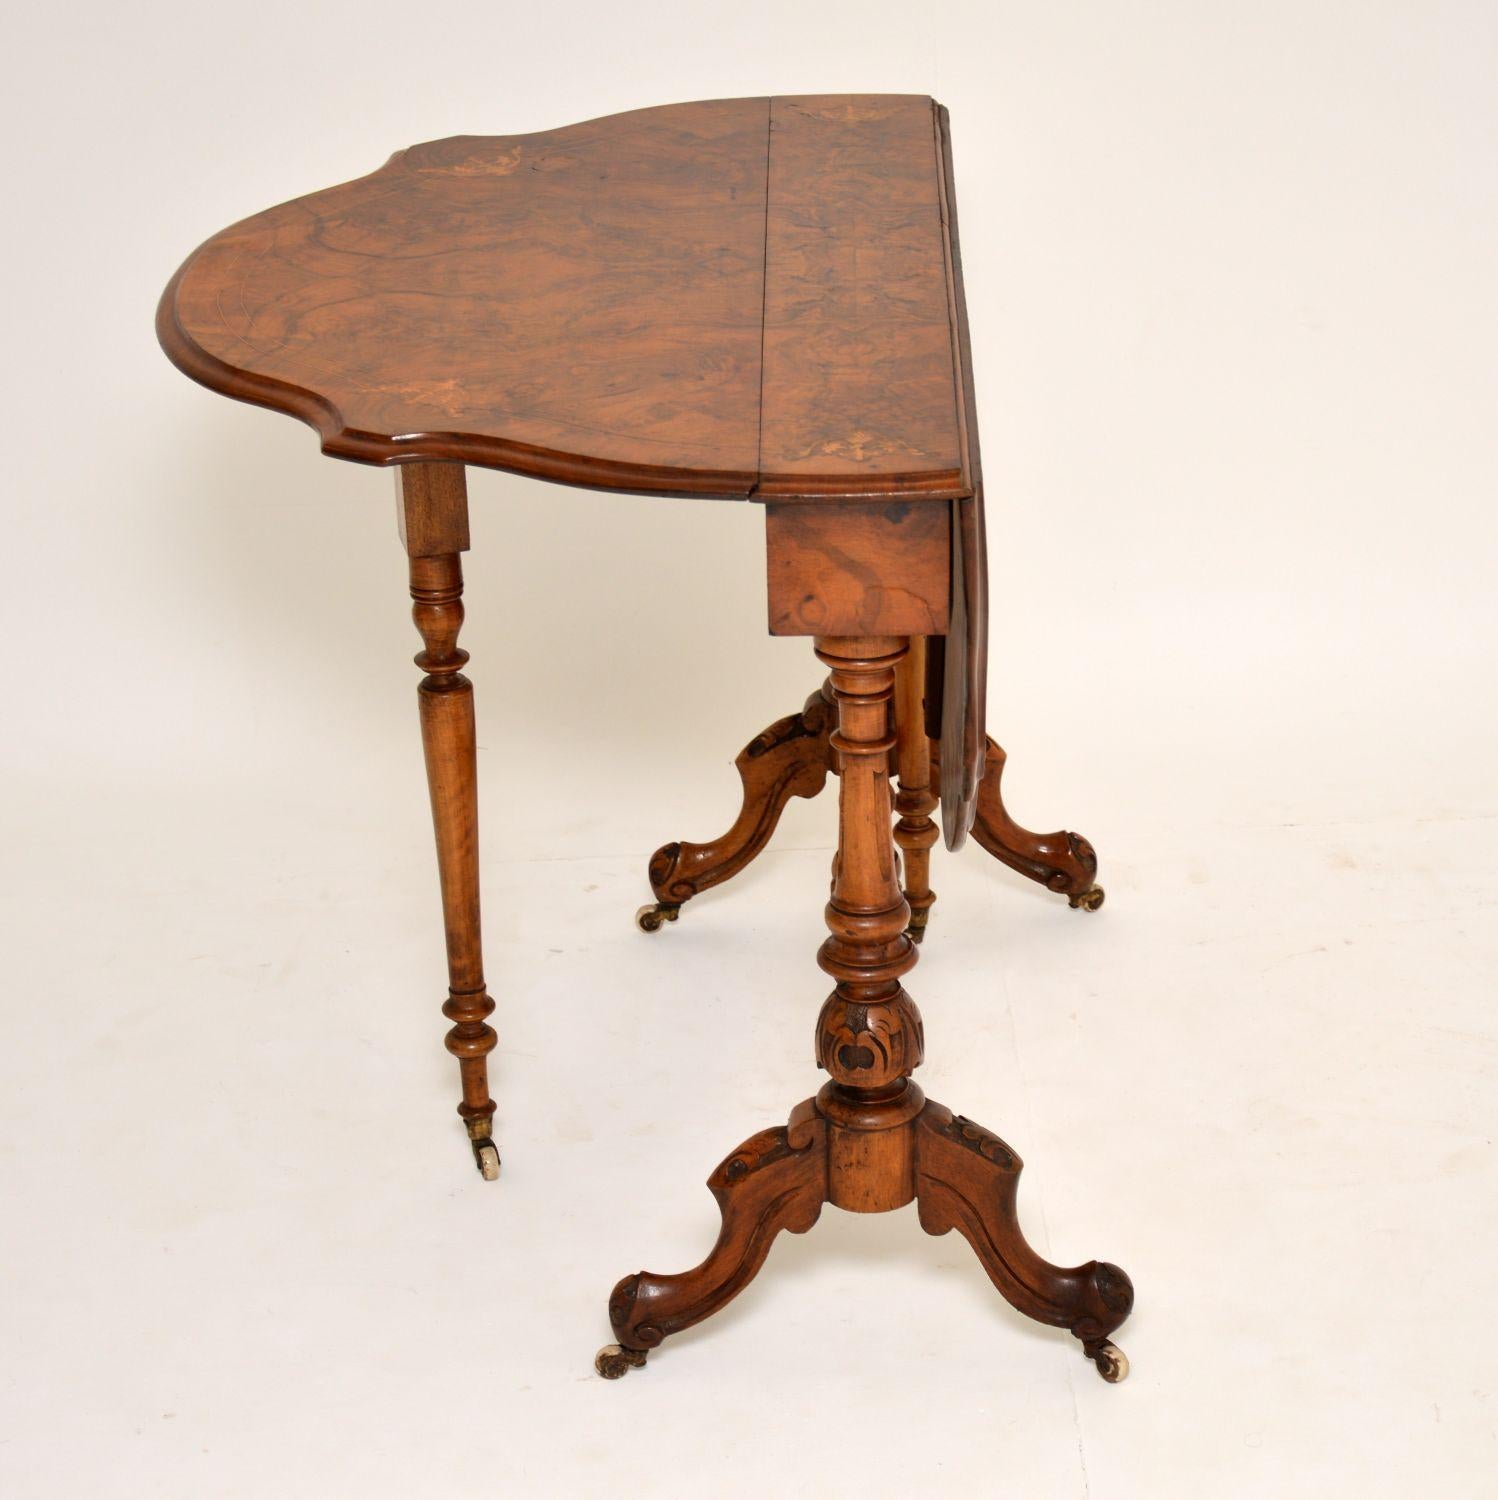 This is one of the nicest antique Sutherland tables I’ve had & it’s in excellent original condition, with a lovely warm color & dating to circa 1860s period. It has a shaped burr walnut top which has beautiful patterns & is nicely inlaid too. The